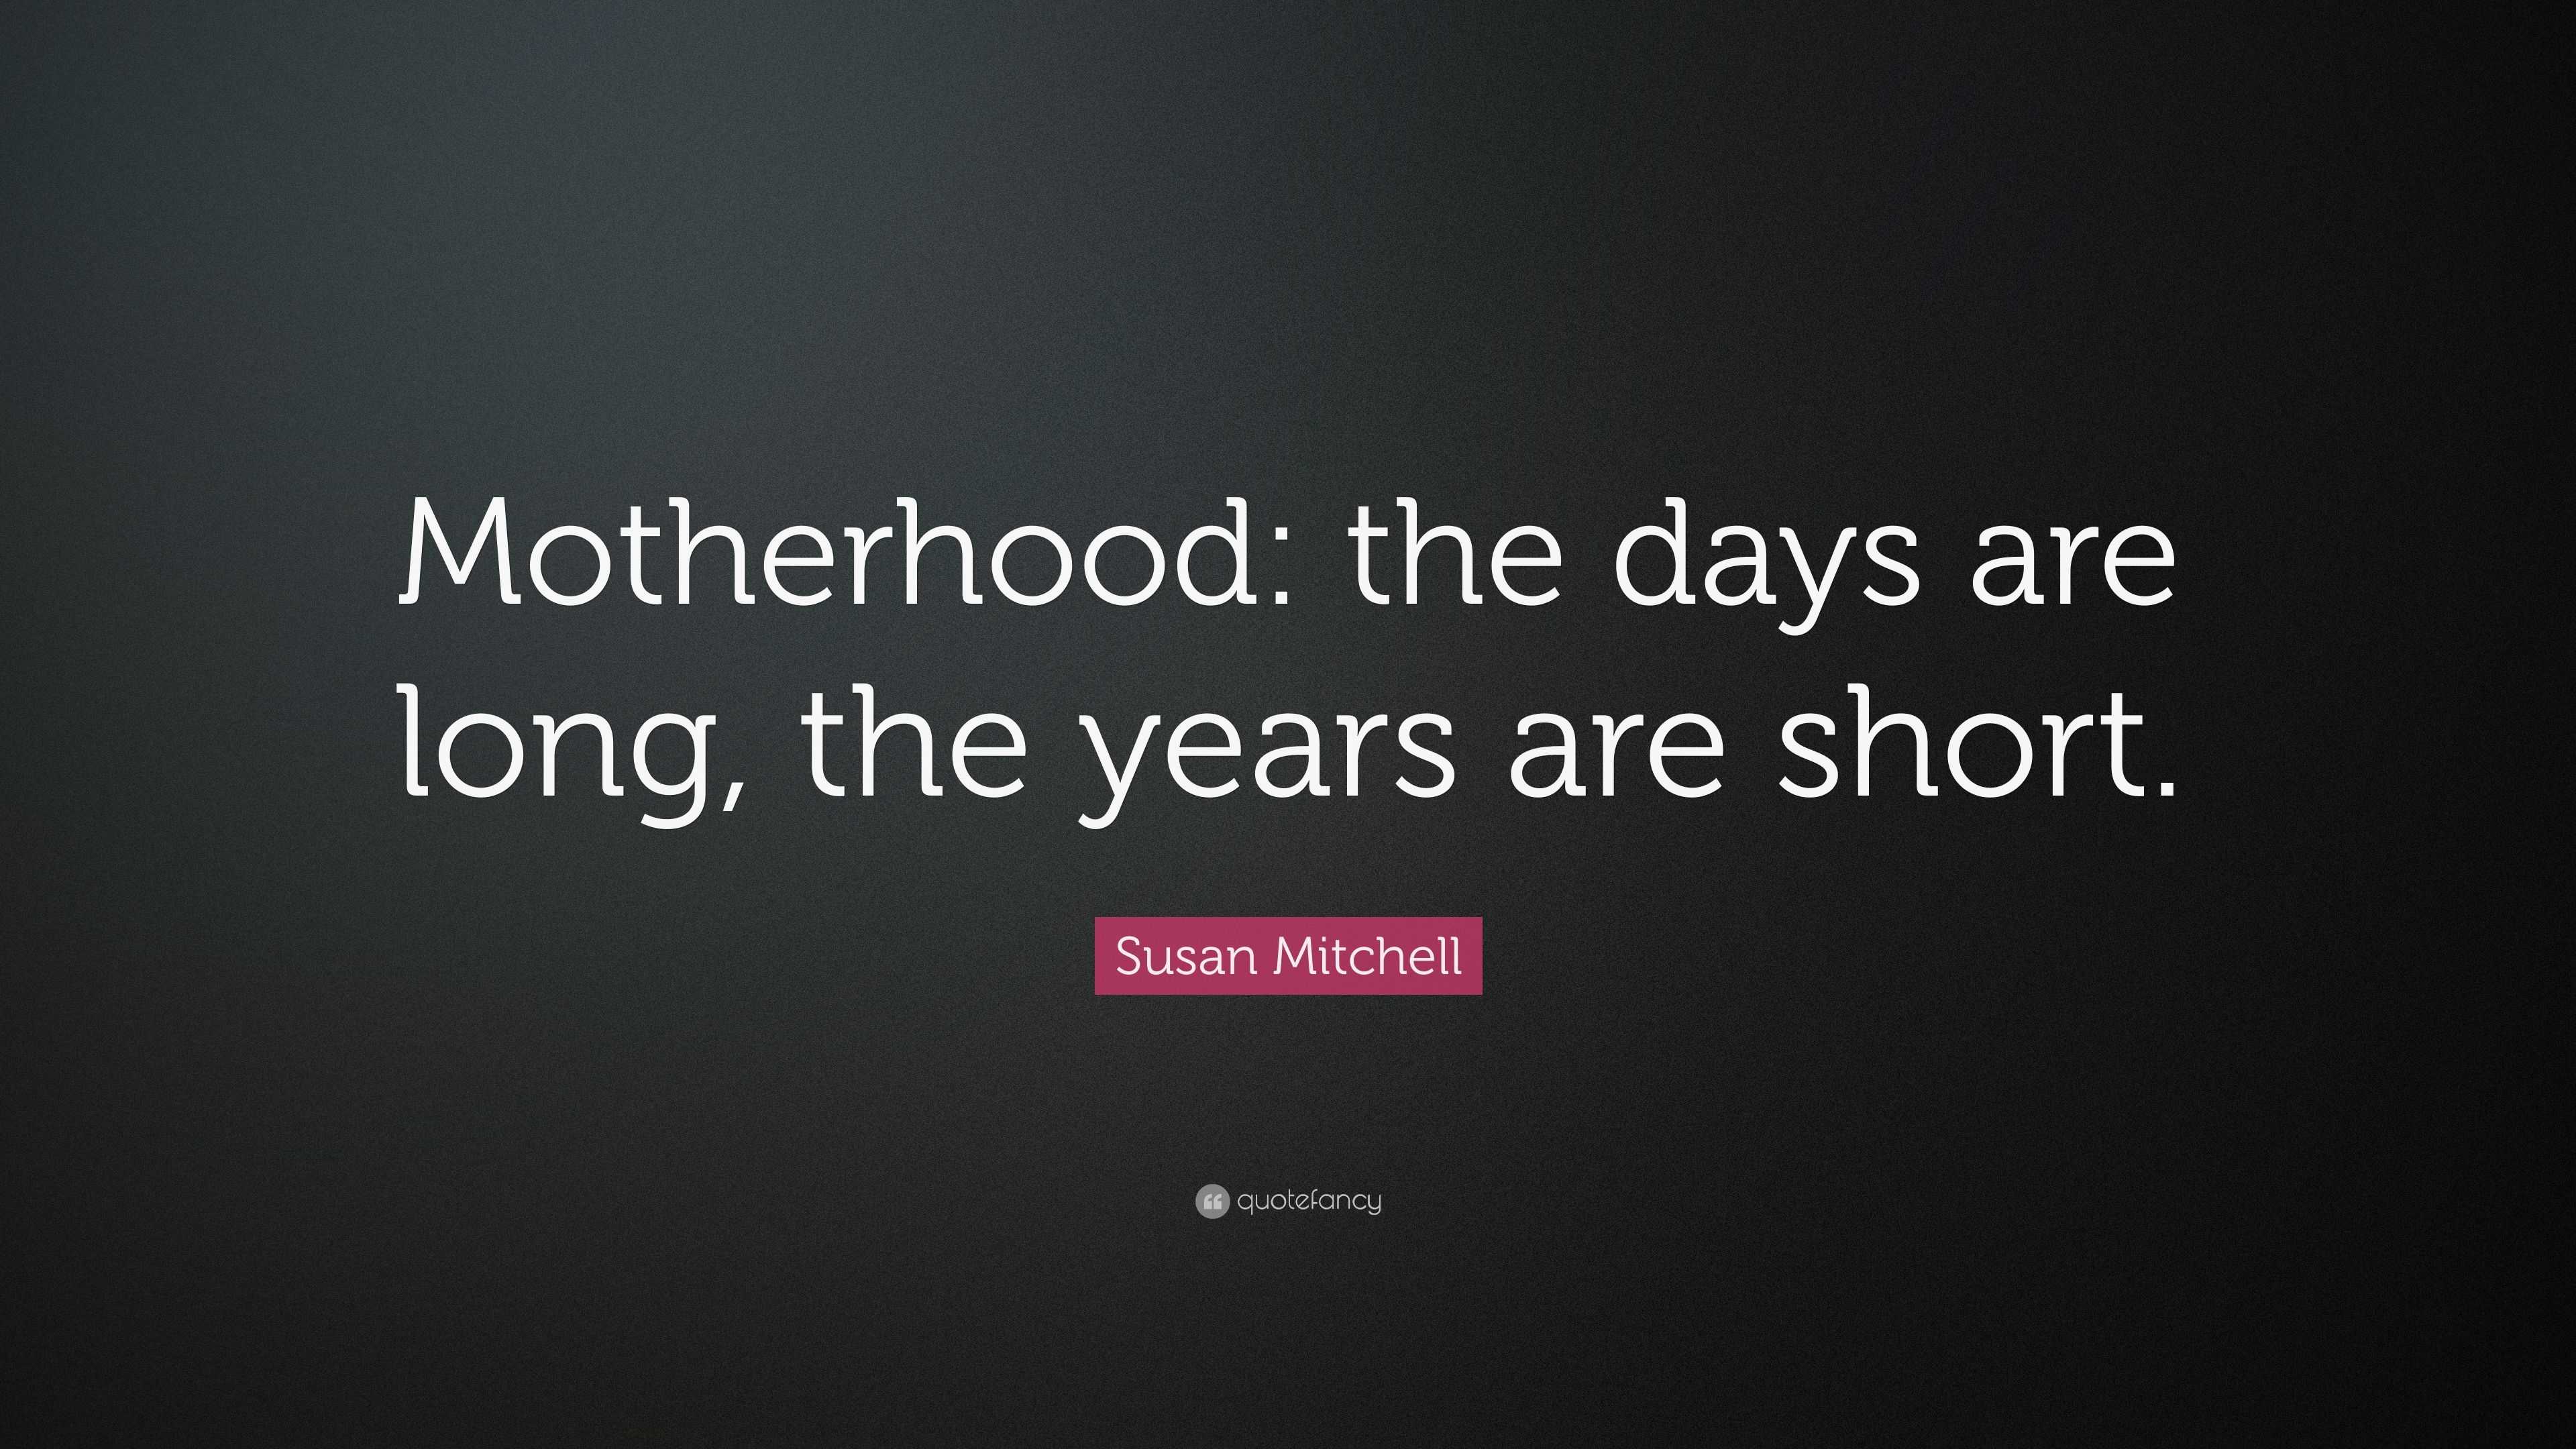 Susan Mitchell Quote: “Motherhood: the days are long, the years are short.”